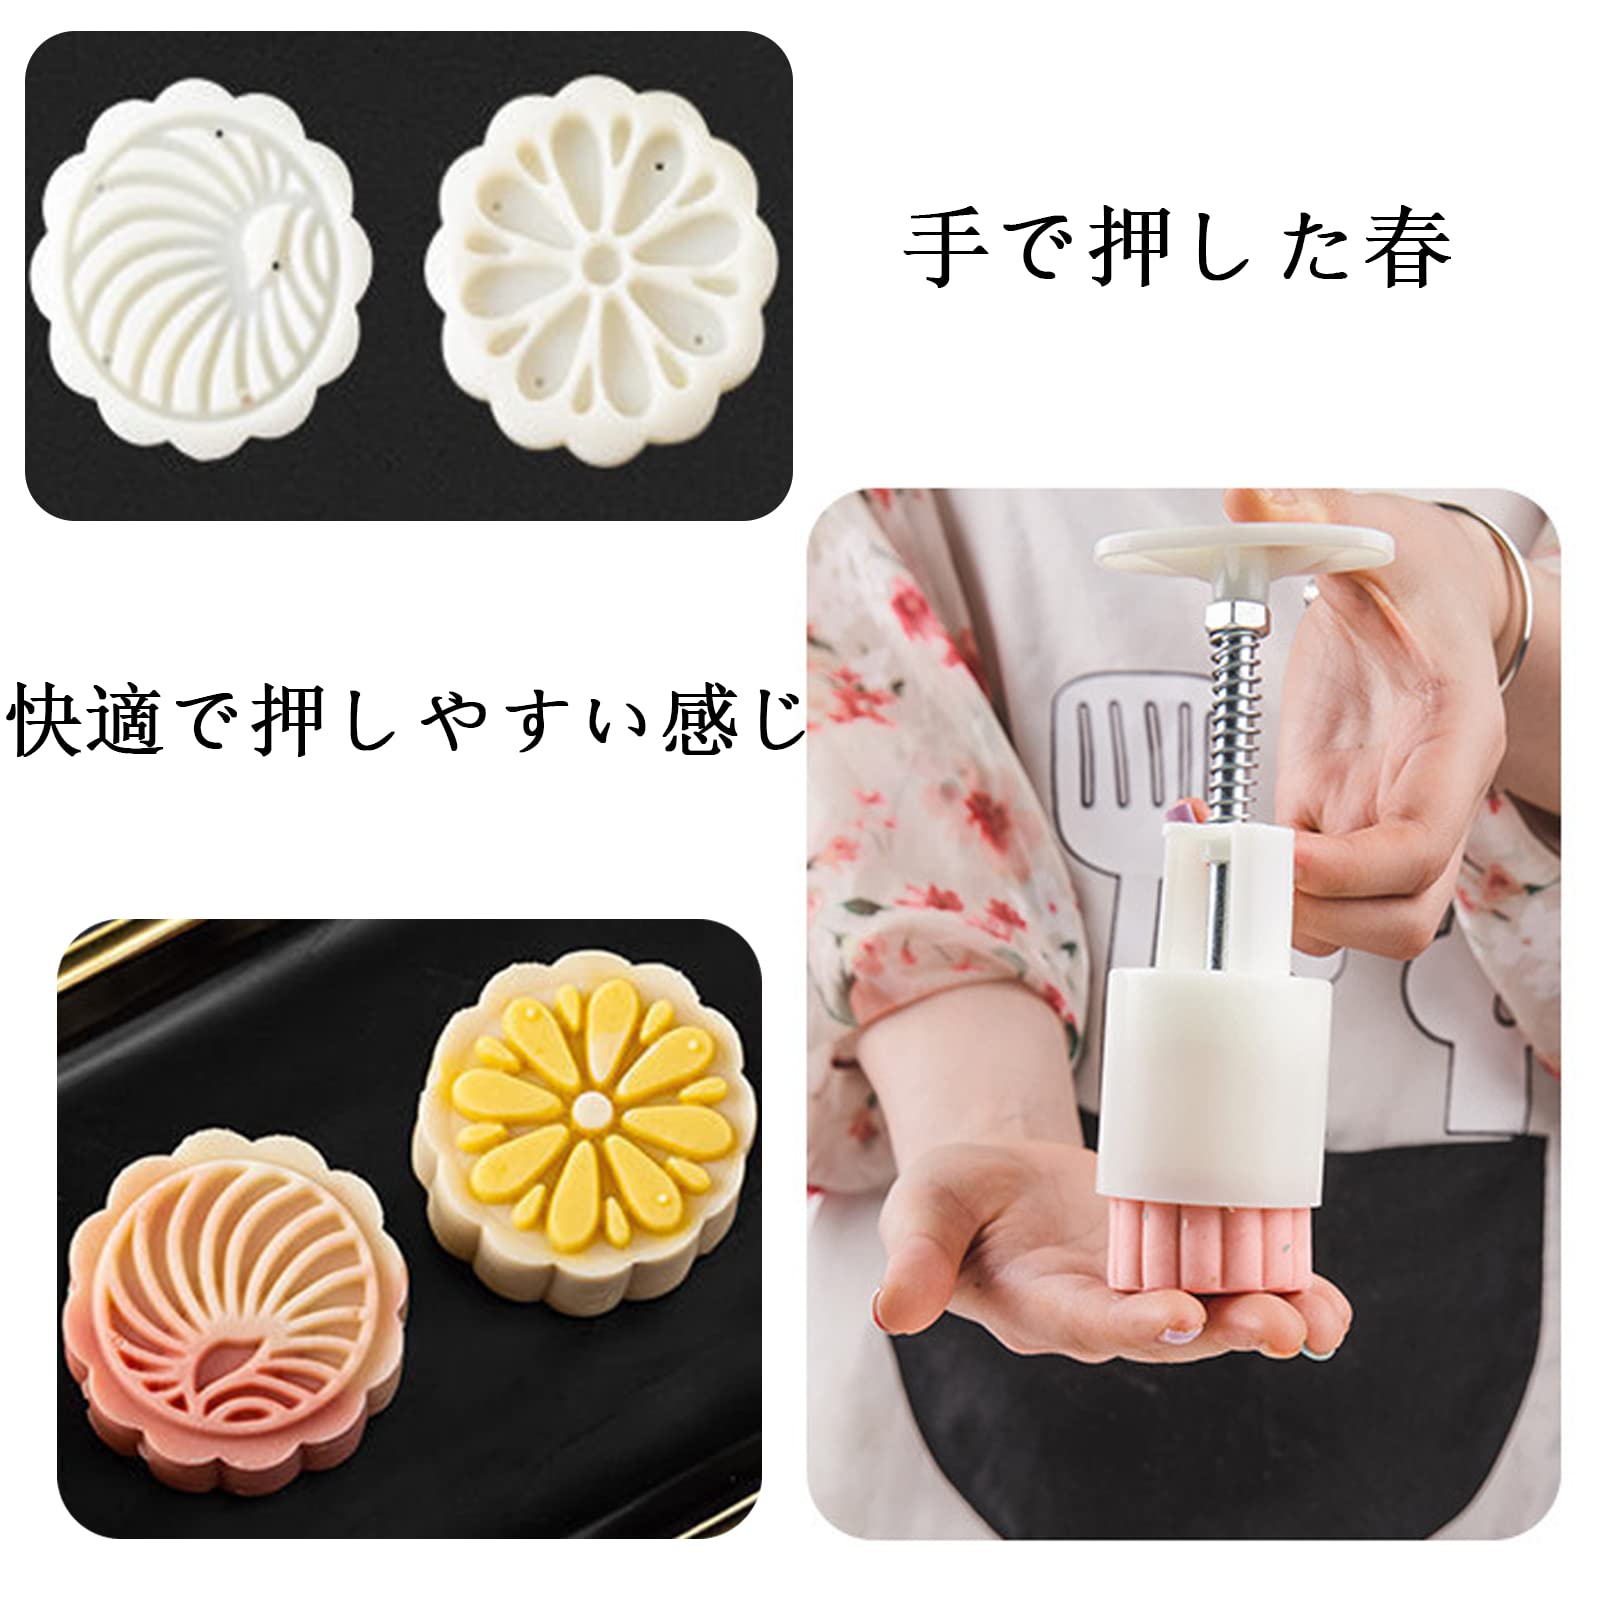 [BEAUTY PLAYER] month mochi type moon cake type month mochi mold month mochi gold type Press manual pressure month mochi cookie type baking type gold type Japanese confectionery middle autumn month mochi AB